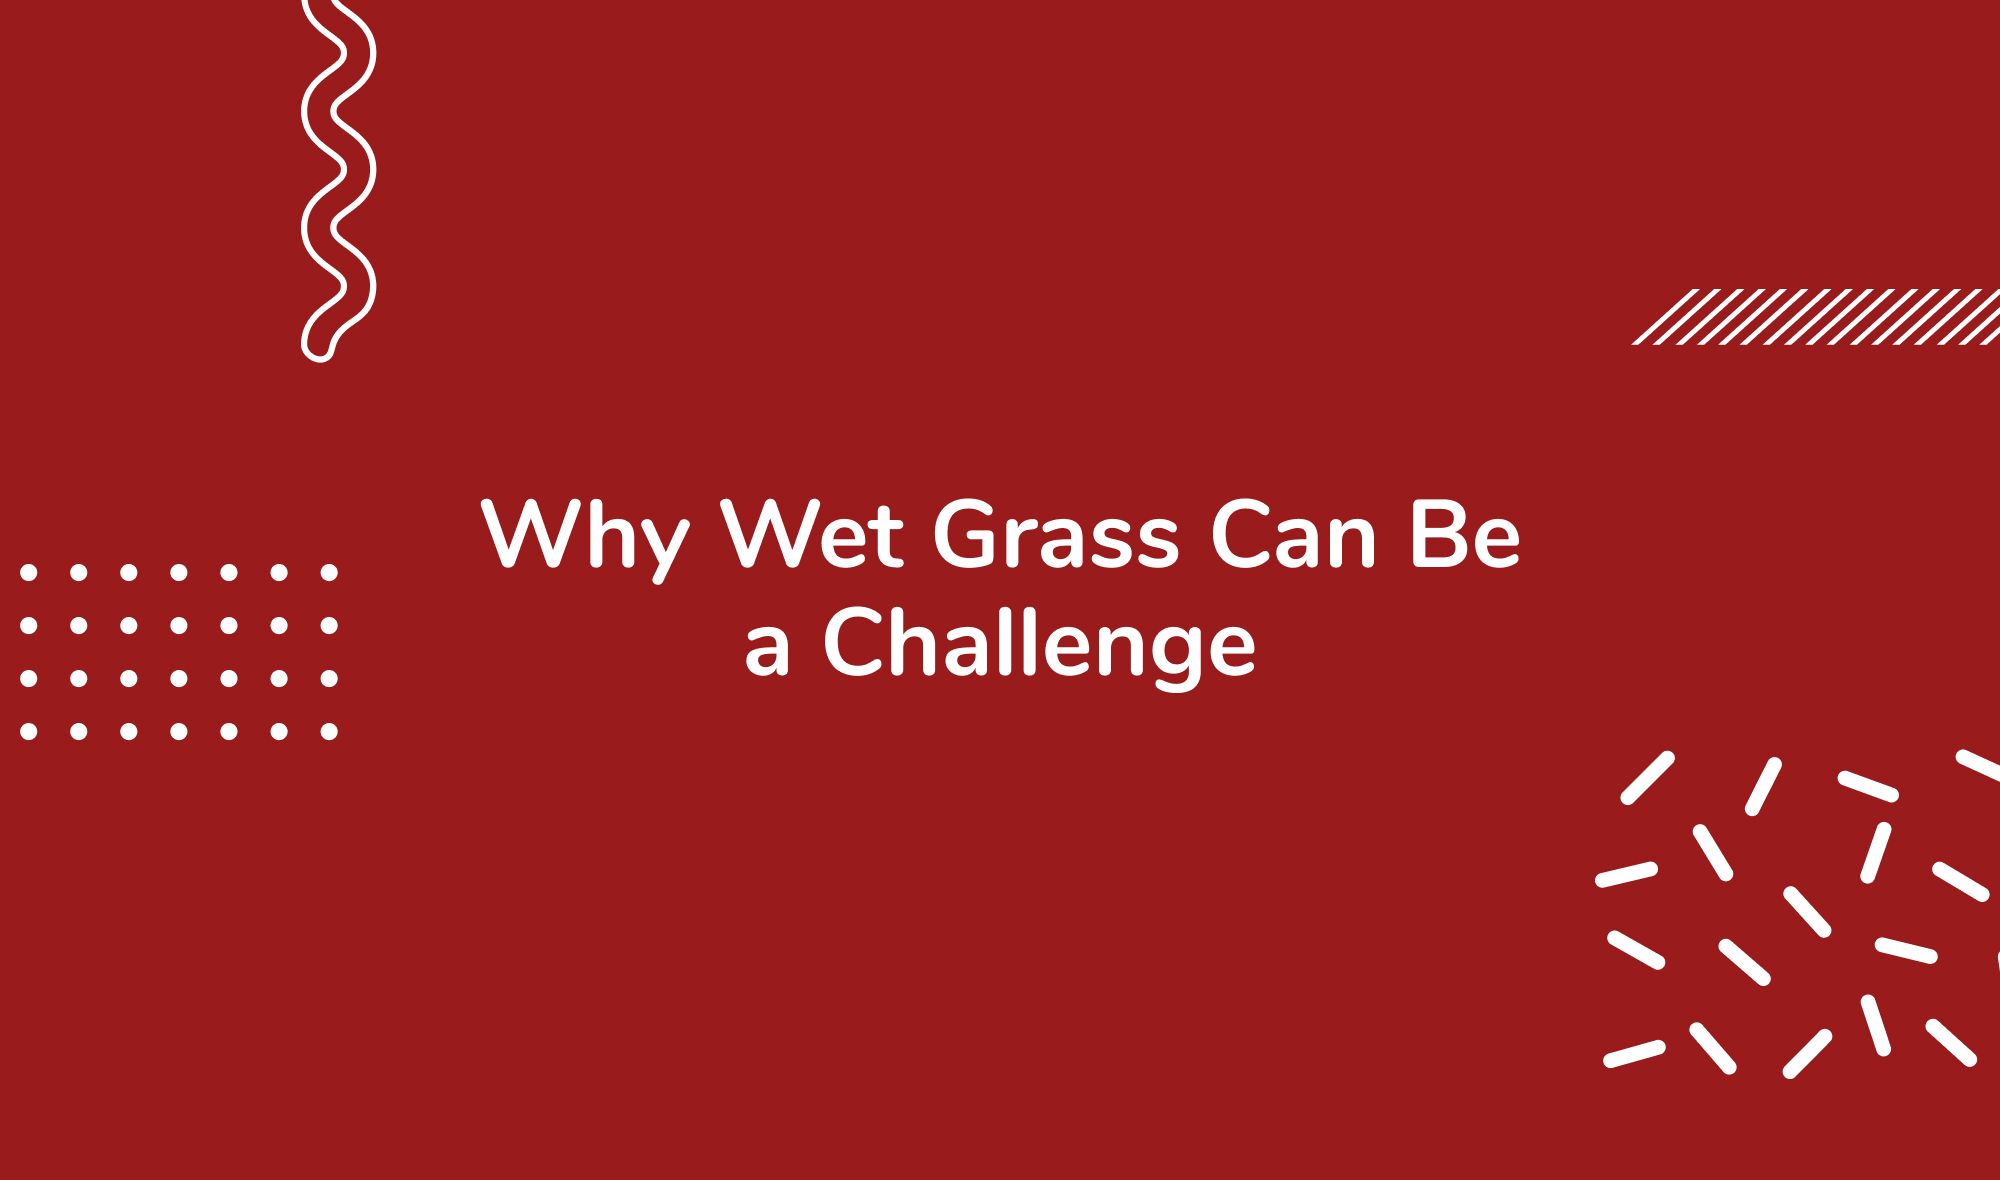 Why Wet Grass Can Be a Challenge